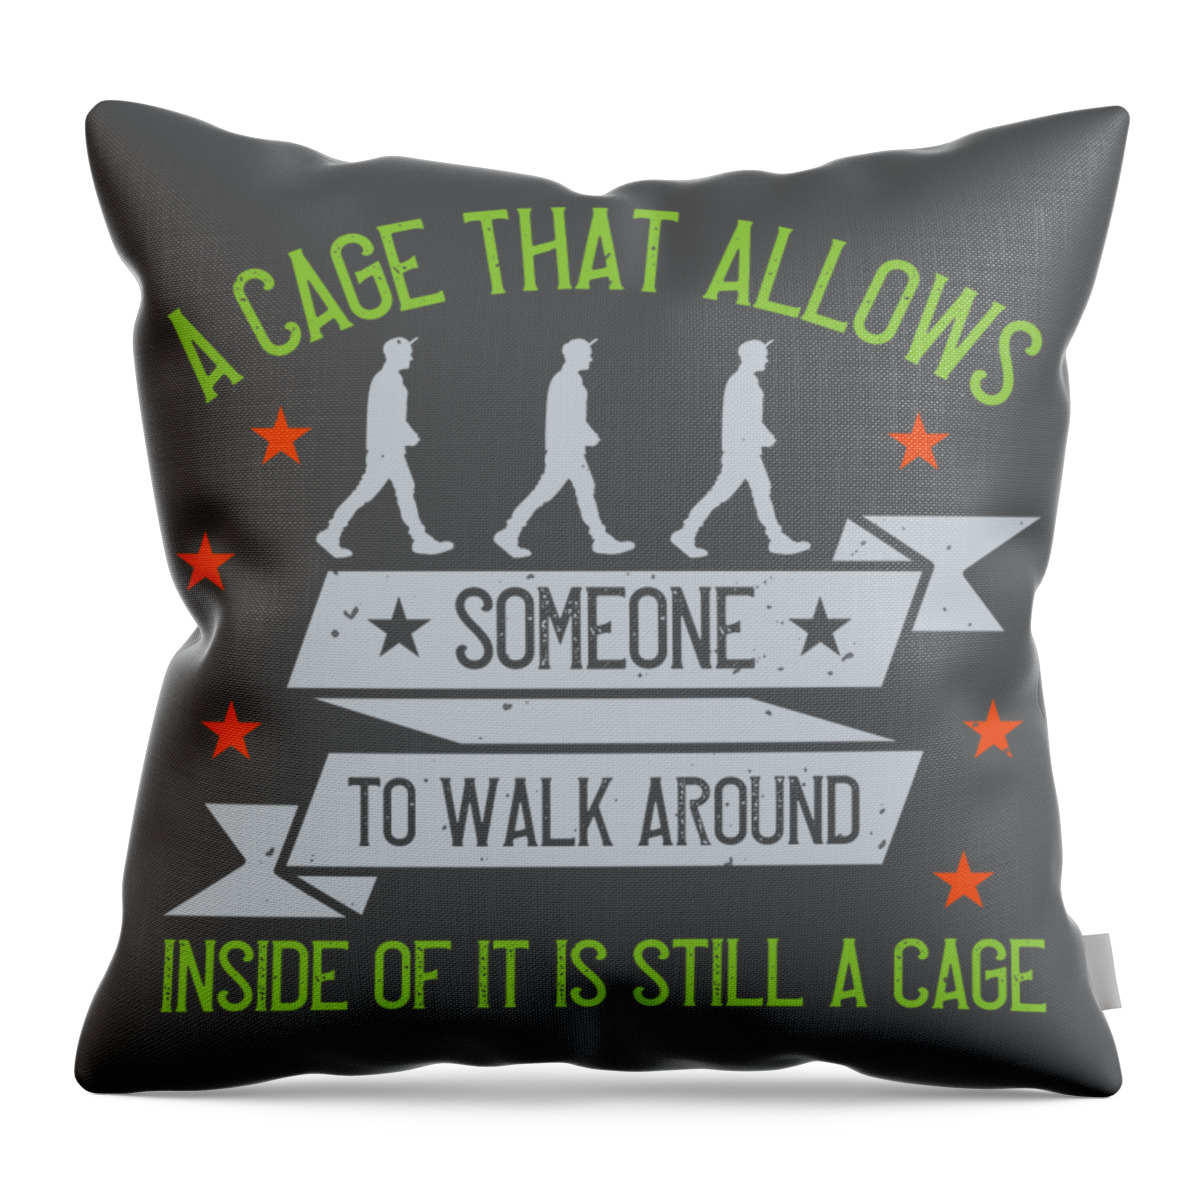 Walking Throw Pillow featuring the digital art Walking Gift A Cage That Allows Someone To Walk Around Inside Of by Jeff Creation